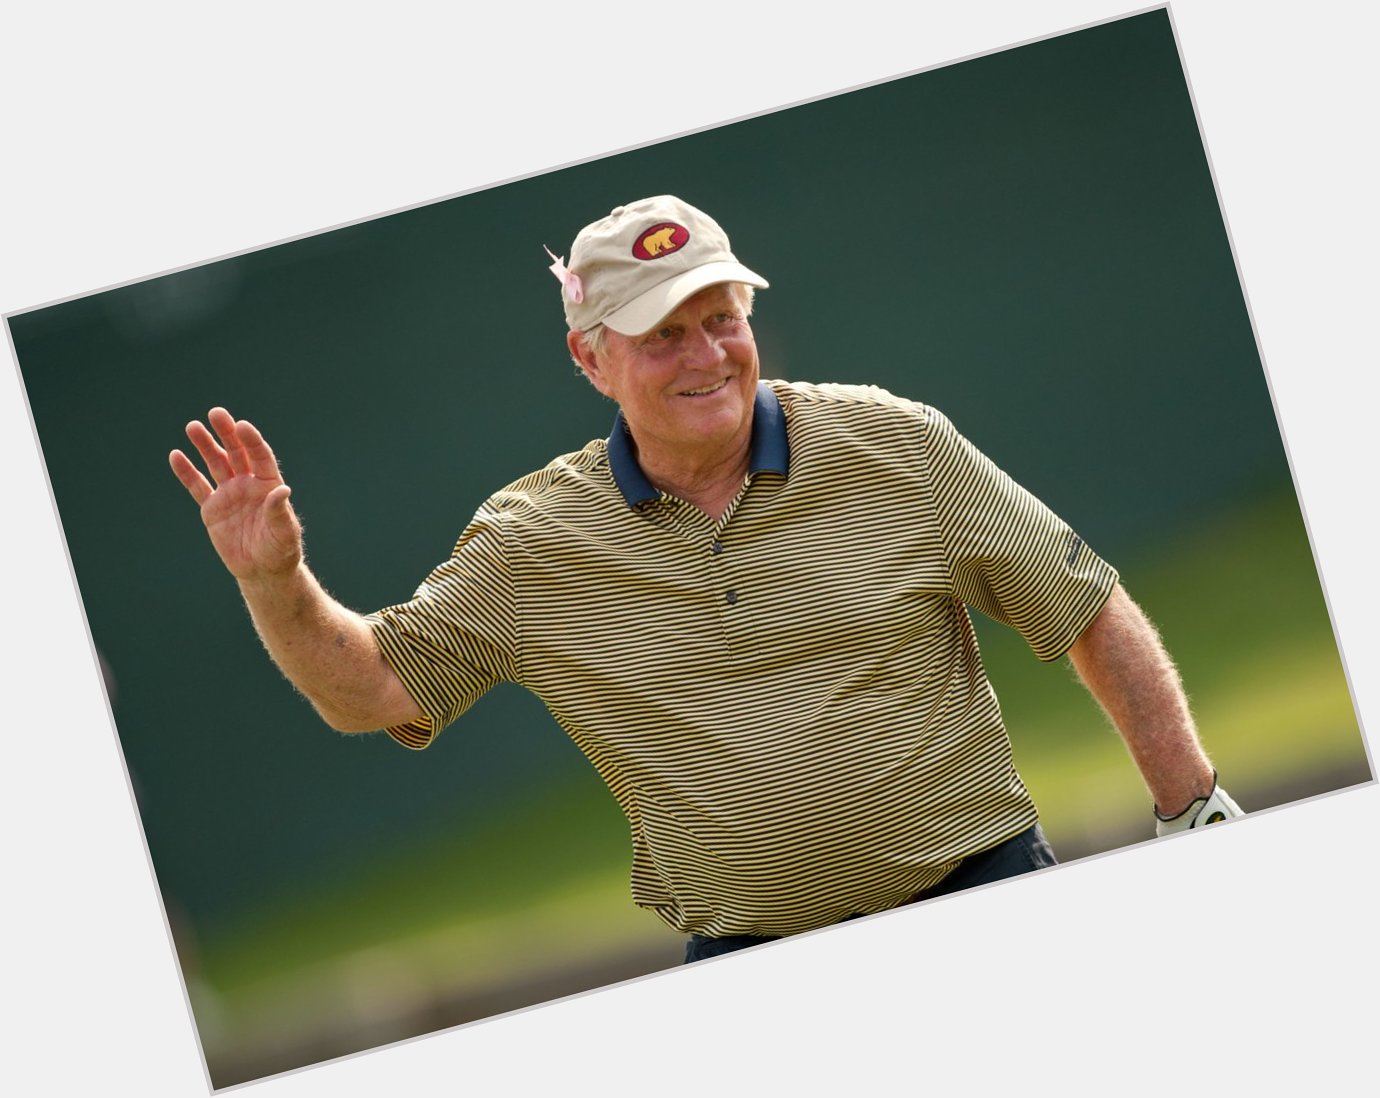 A very happy birthday to the Jack Nicklaus! 